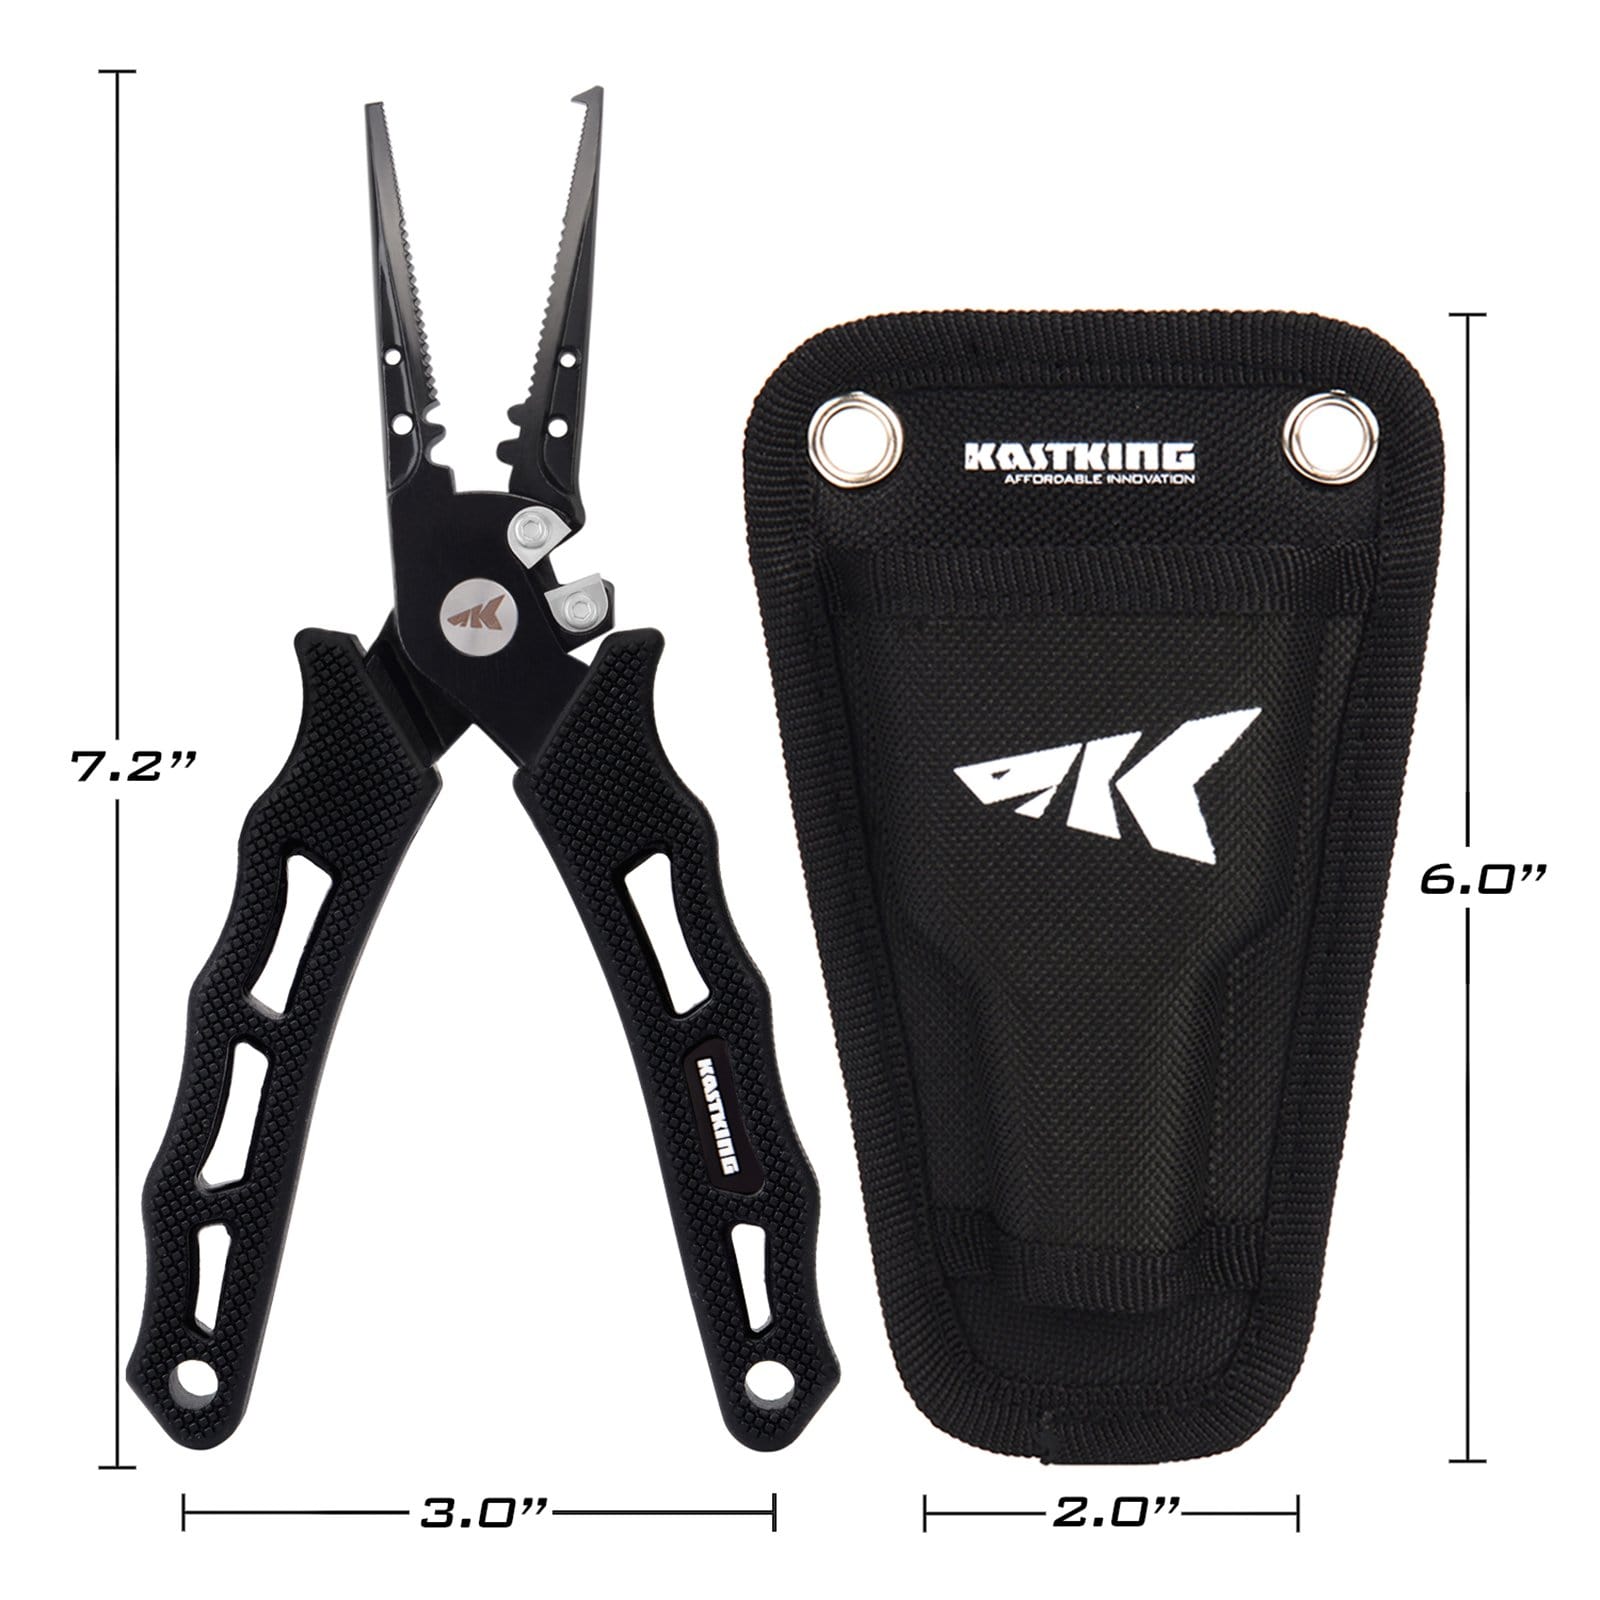 Ketsicart Aluminum Fishing Pliers Split Ring Cutters Hooks Remover Fishing  Holder Tackle with Oxford Sheath and Security Landyard : : Home  Improvement